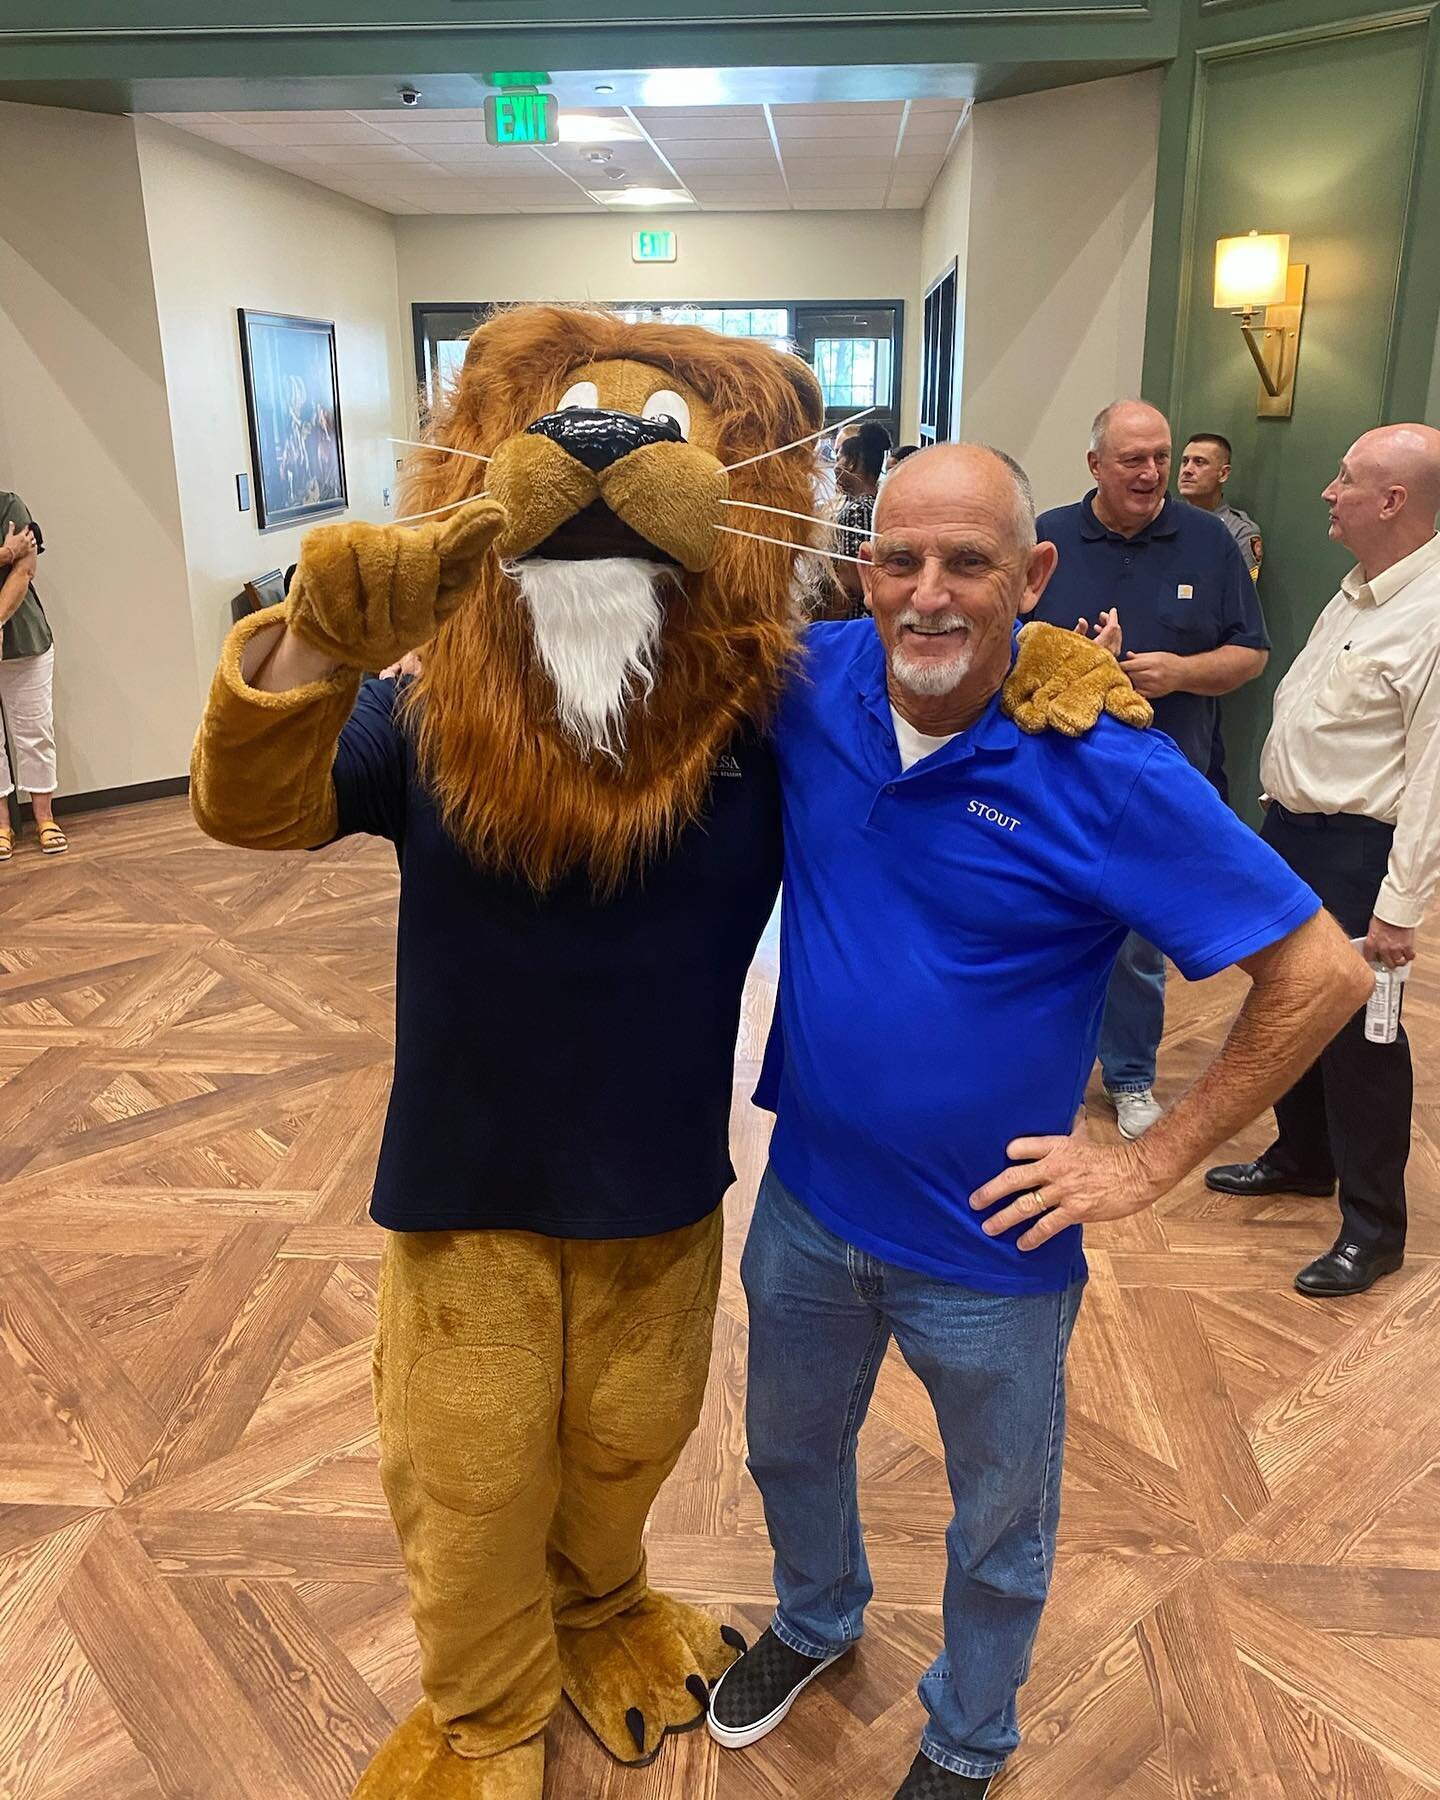 Looks like one of our superintendents has been made an honorary Tulsa Classical Academy LionHeart!

&quot;A TCA LionHeart is honorable in conduct, honest in word and deed, courageous in study and service, and respectful of those around them.&quot;

W